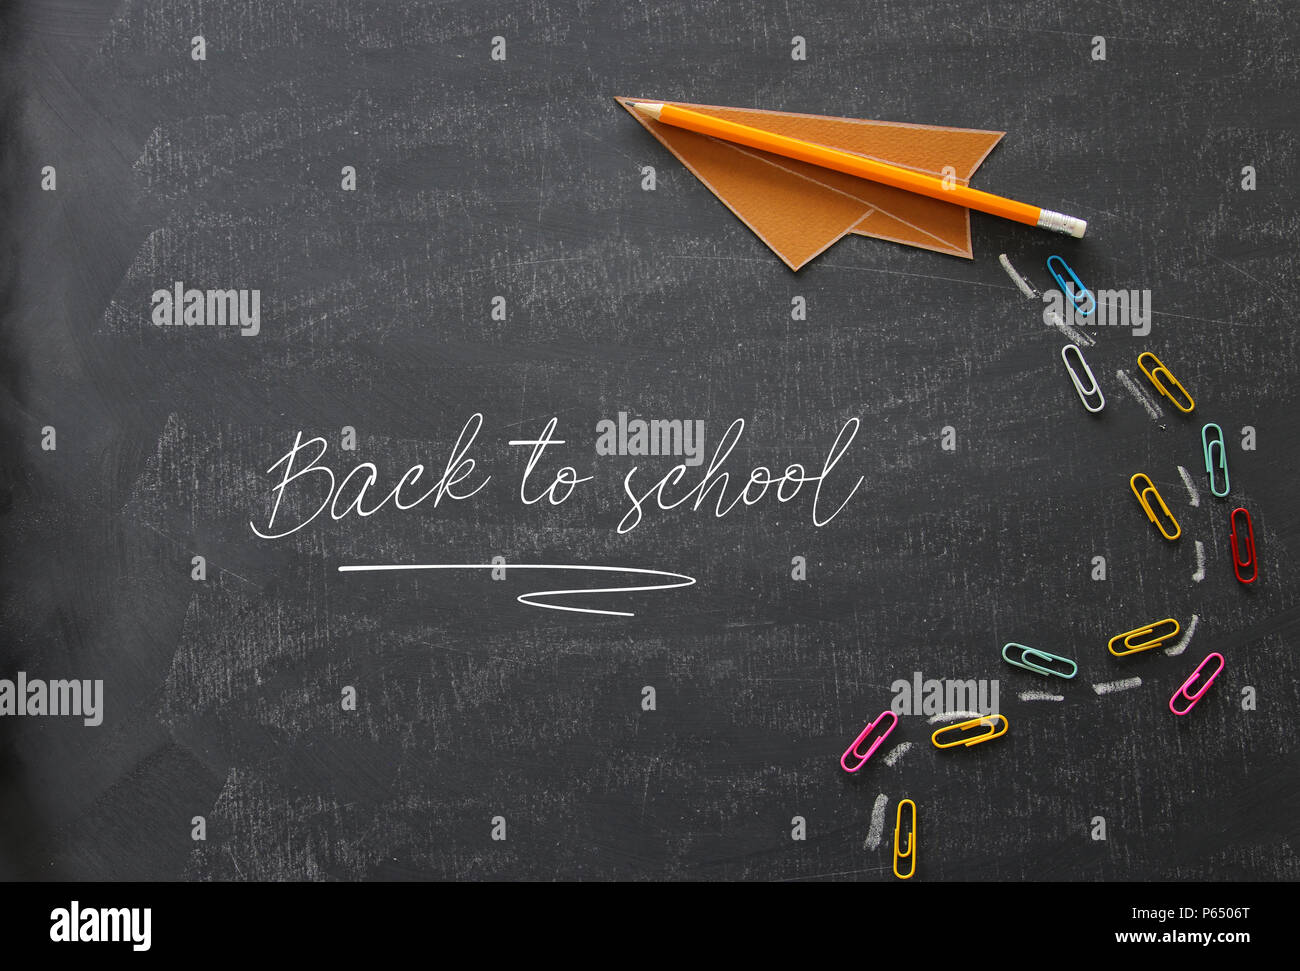 Top view image of paper plane over classroom blackboard background Stock  Photo - Alamy